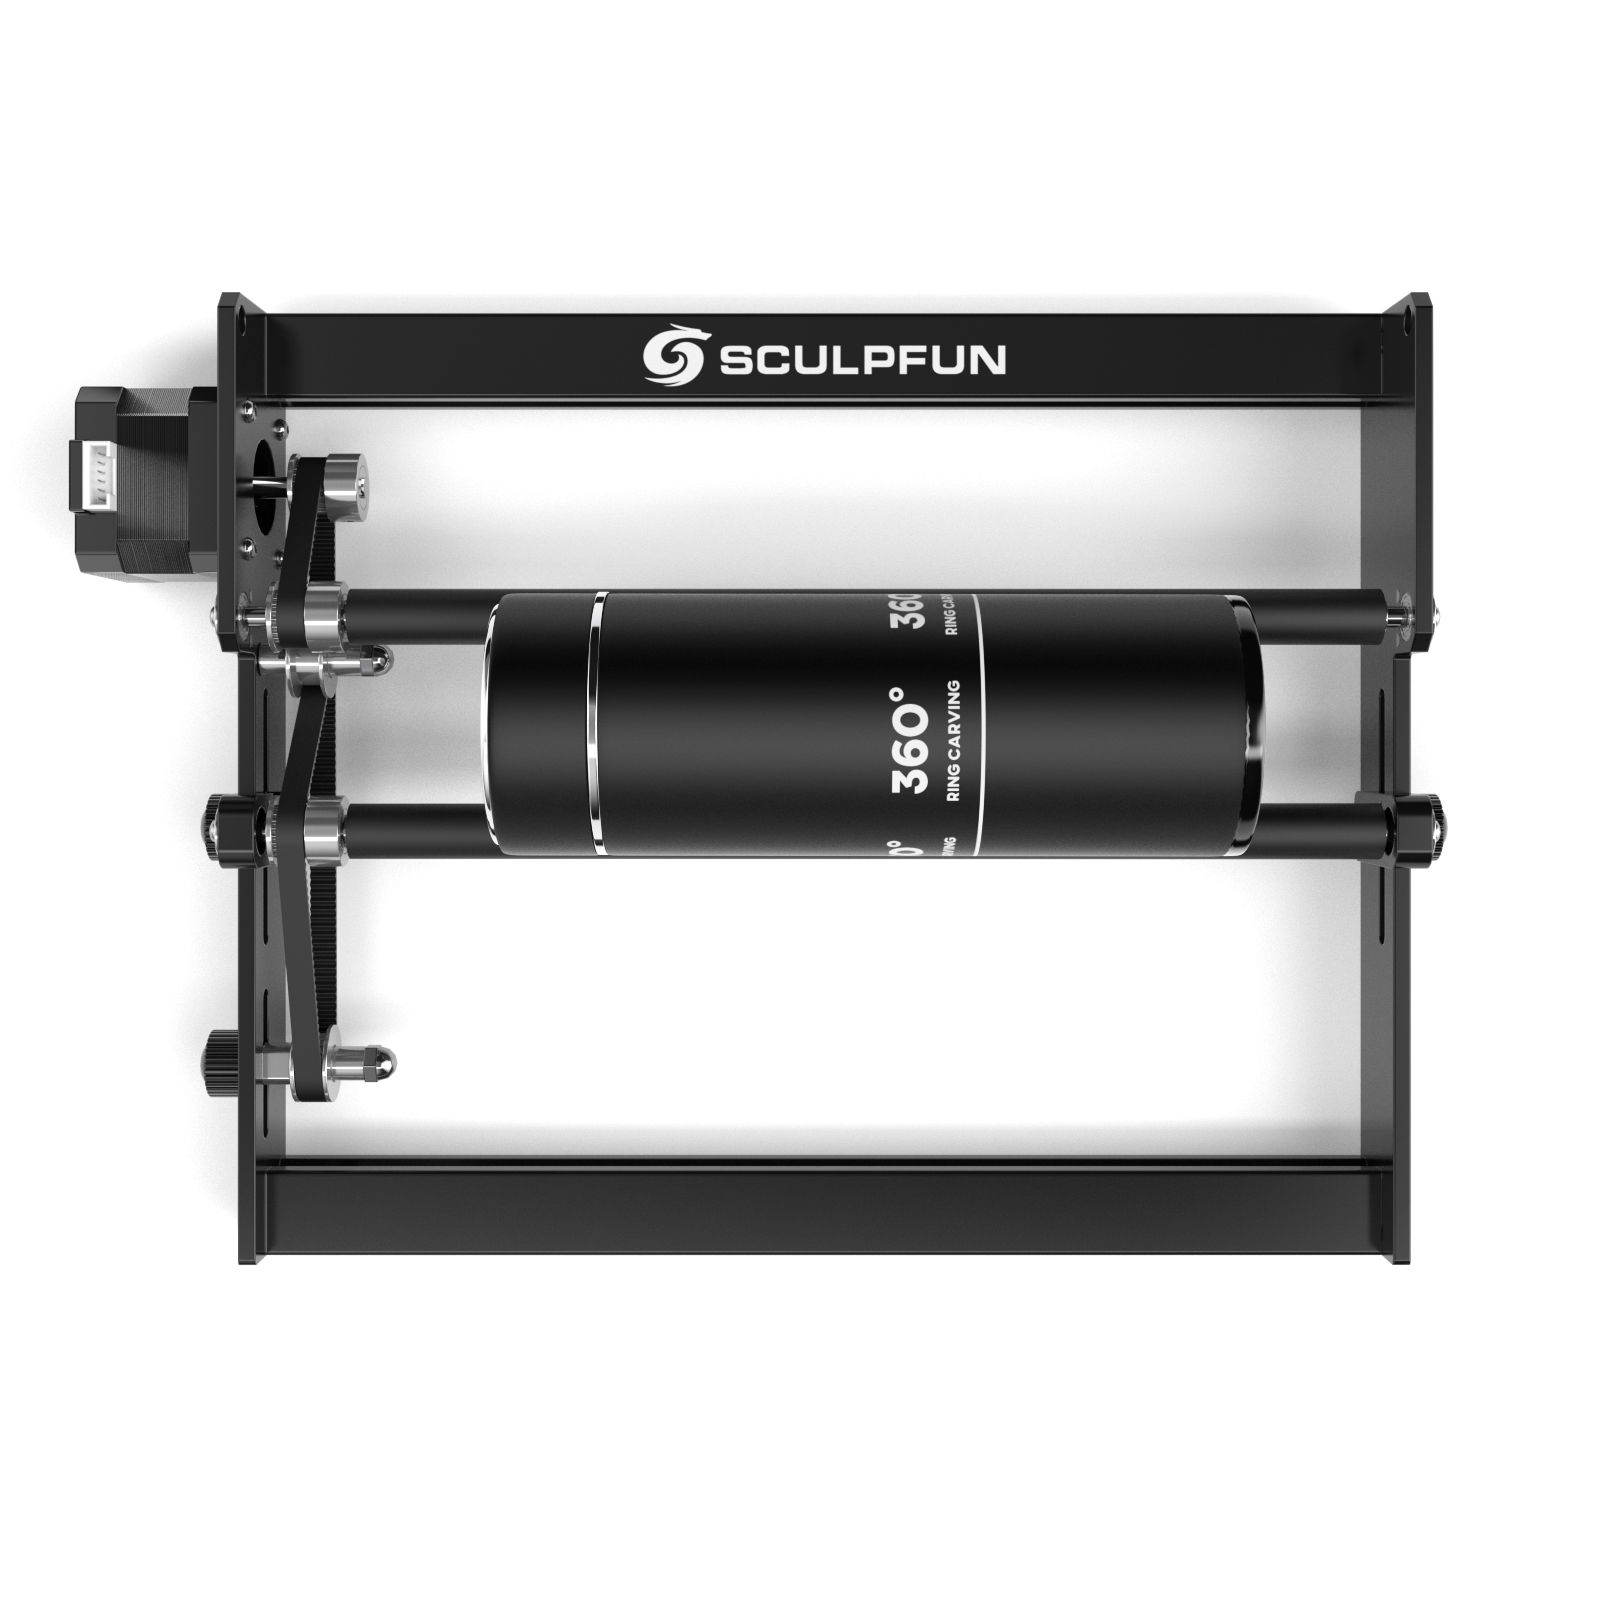 Find SCULPFUN Laser Rotary Roller for S9 Laser Engraver Y axis Roller 360 degree Rotating for 6 150mm Engraving Diameter 4 raise feet for Cylindrical Objects fit S6 S6 PRO for Sale on Gipsybee.com with cryptocurrencies